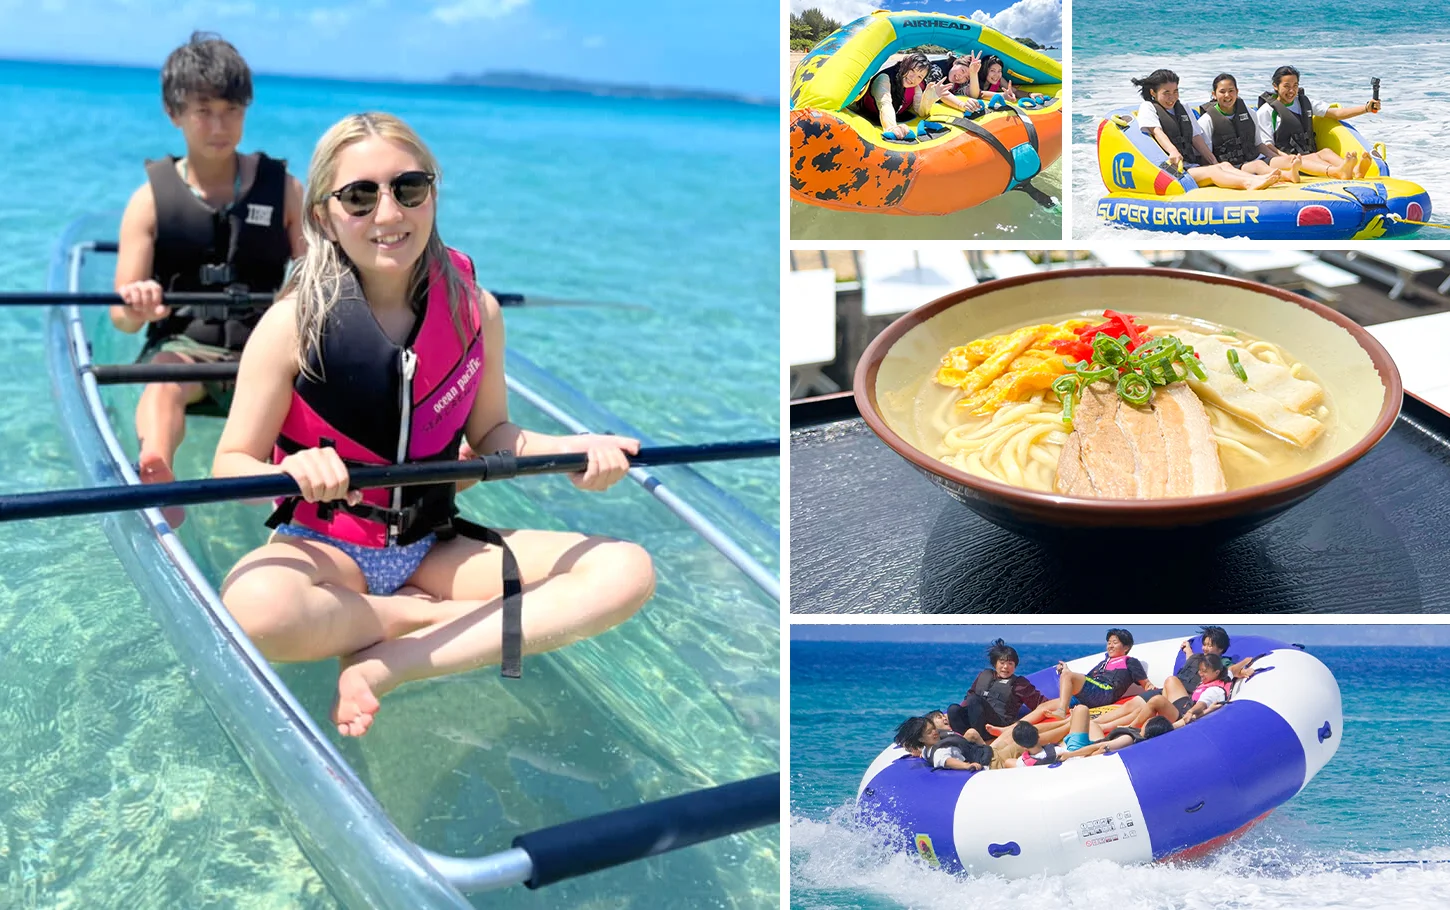 Okinawa Tsuken Island Sea Cruise Full Day Plan with Choice of Activities and Meal